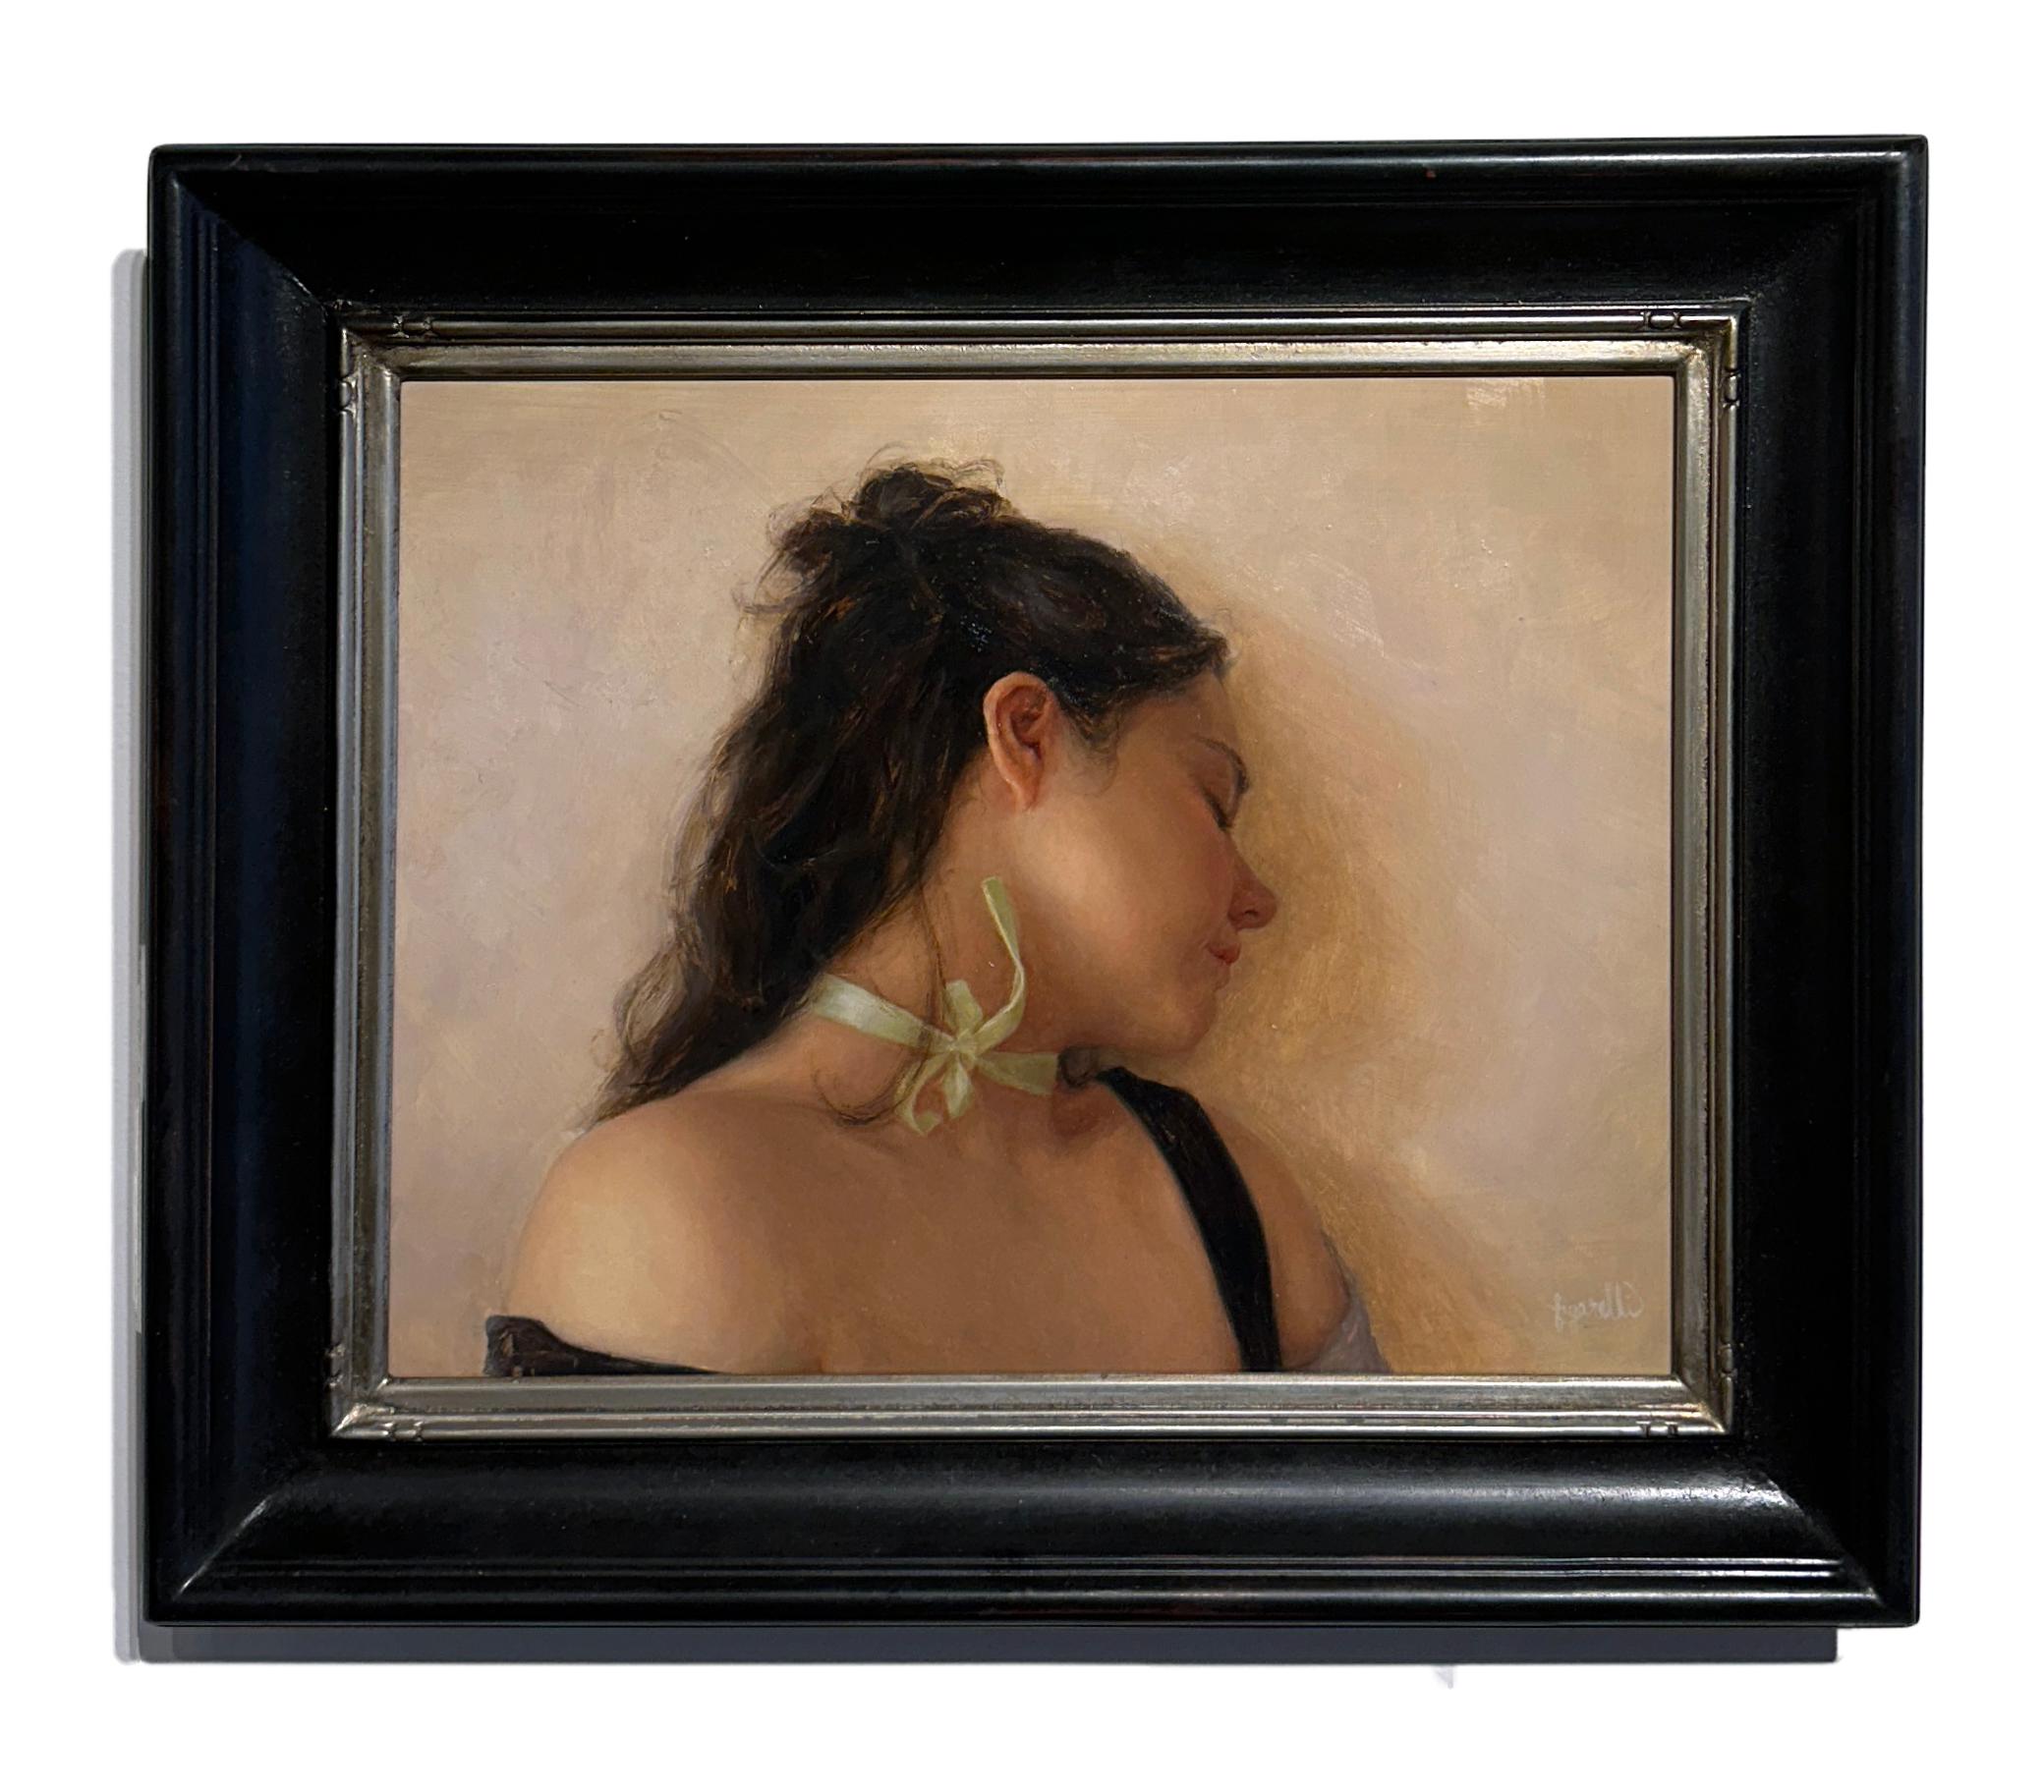 Tina Figarelli Portrait Painting - The Girl with the Green Ribbon - Contemplative Female Figure, Oil on Panel